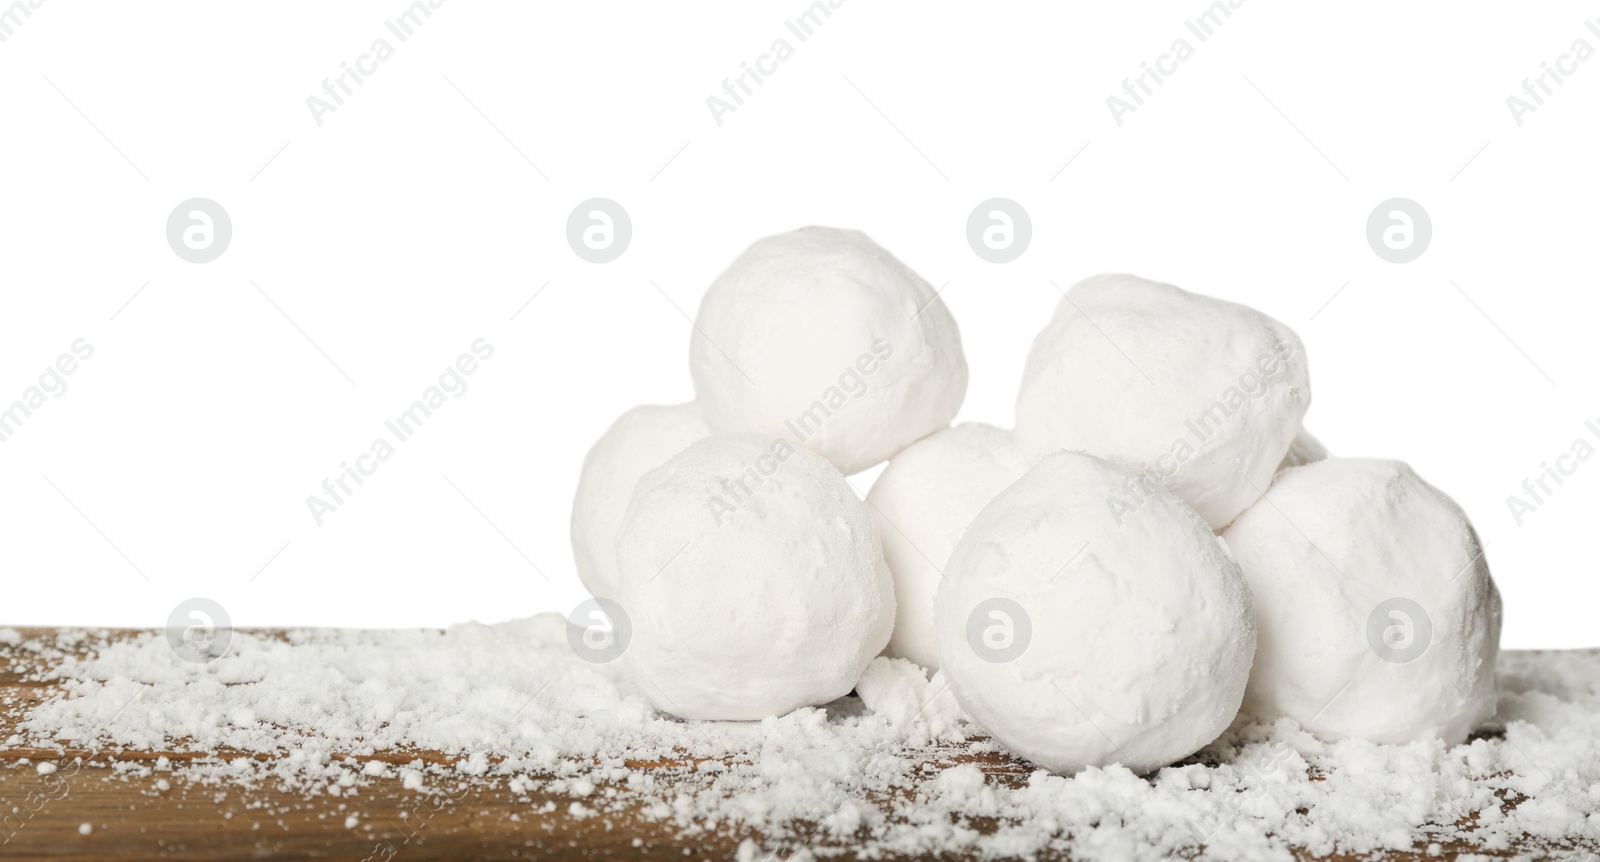 Photo of Snowballs on wooden table against white background